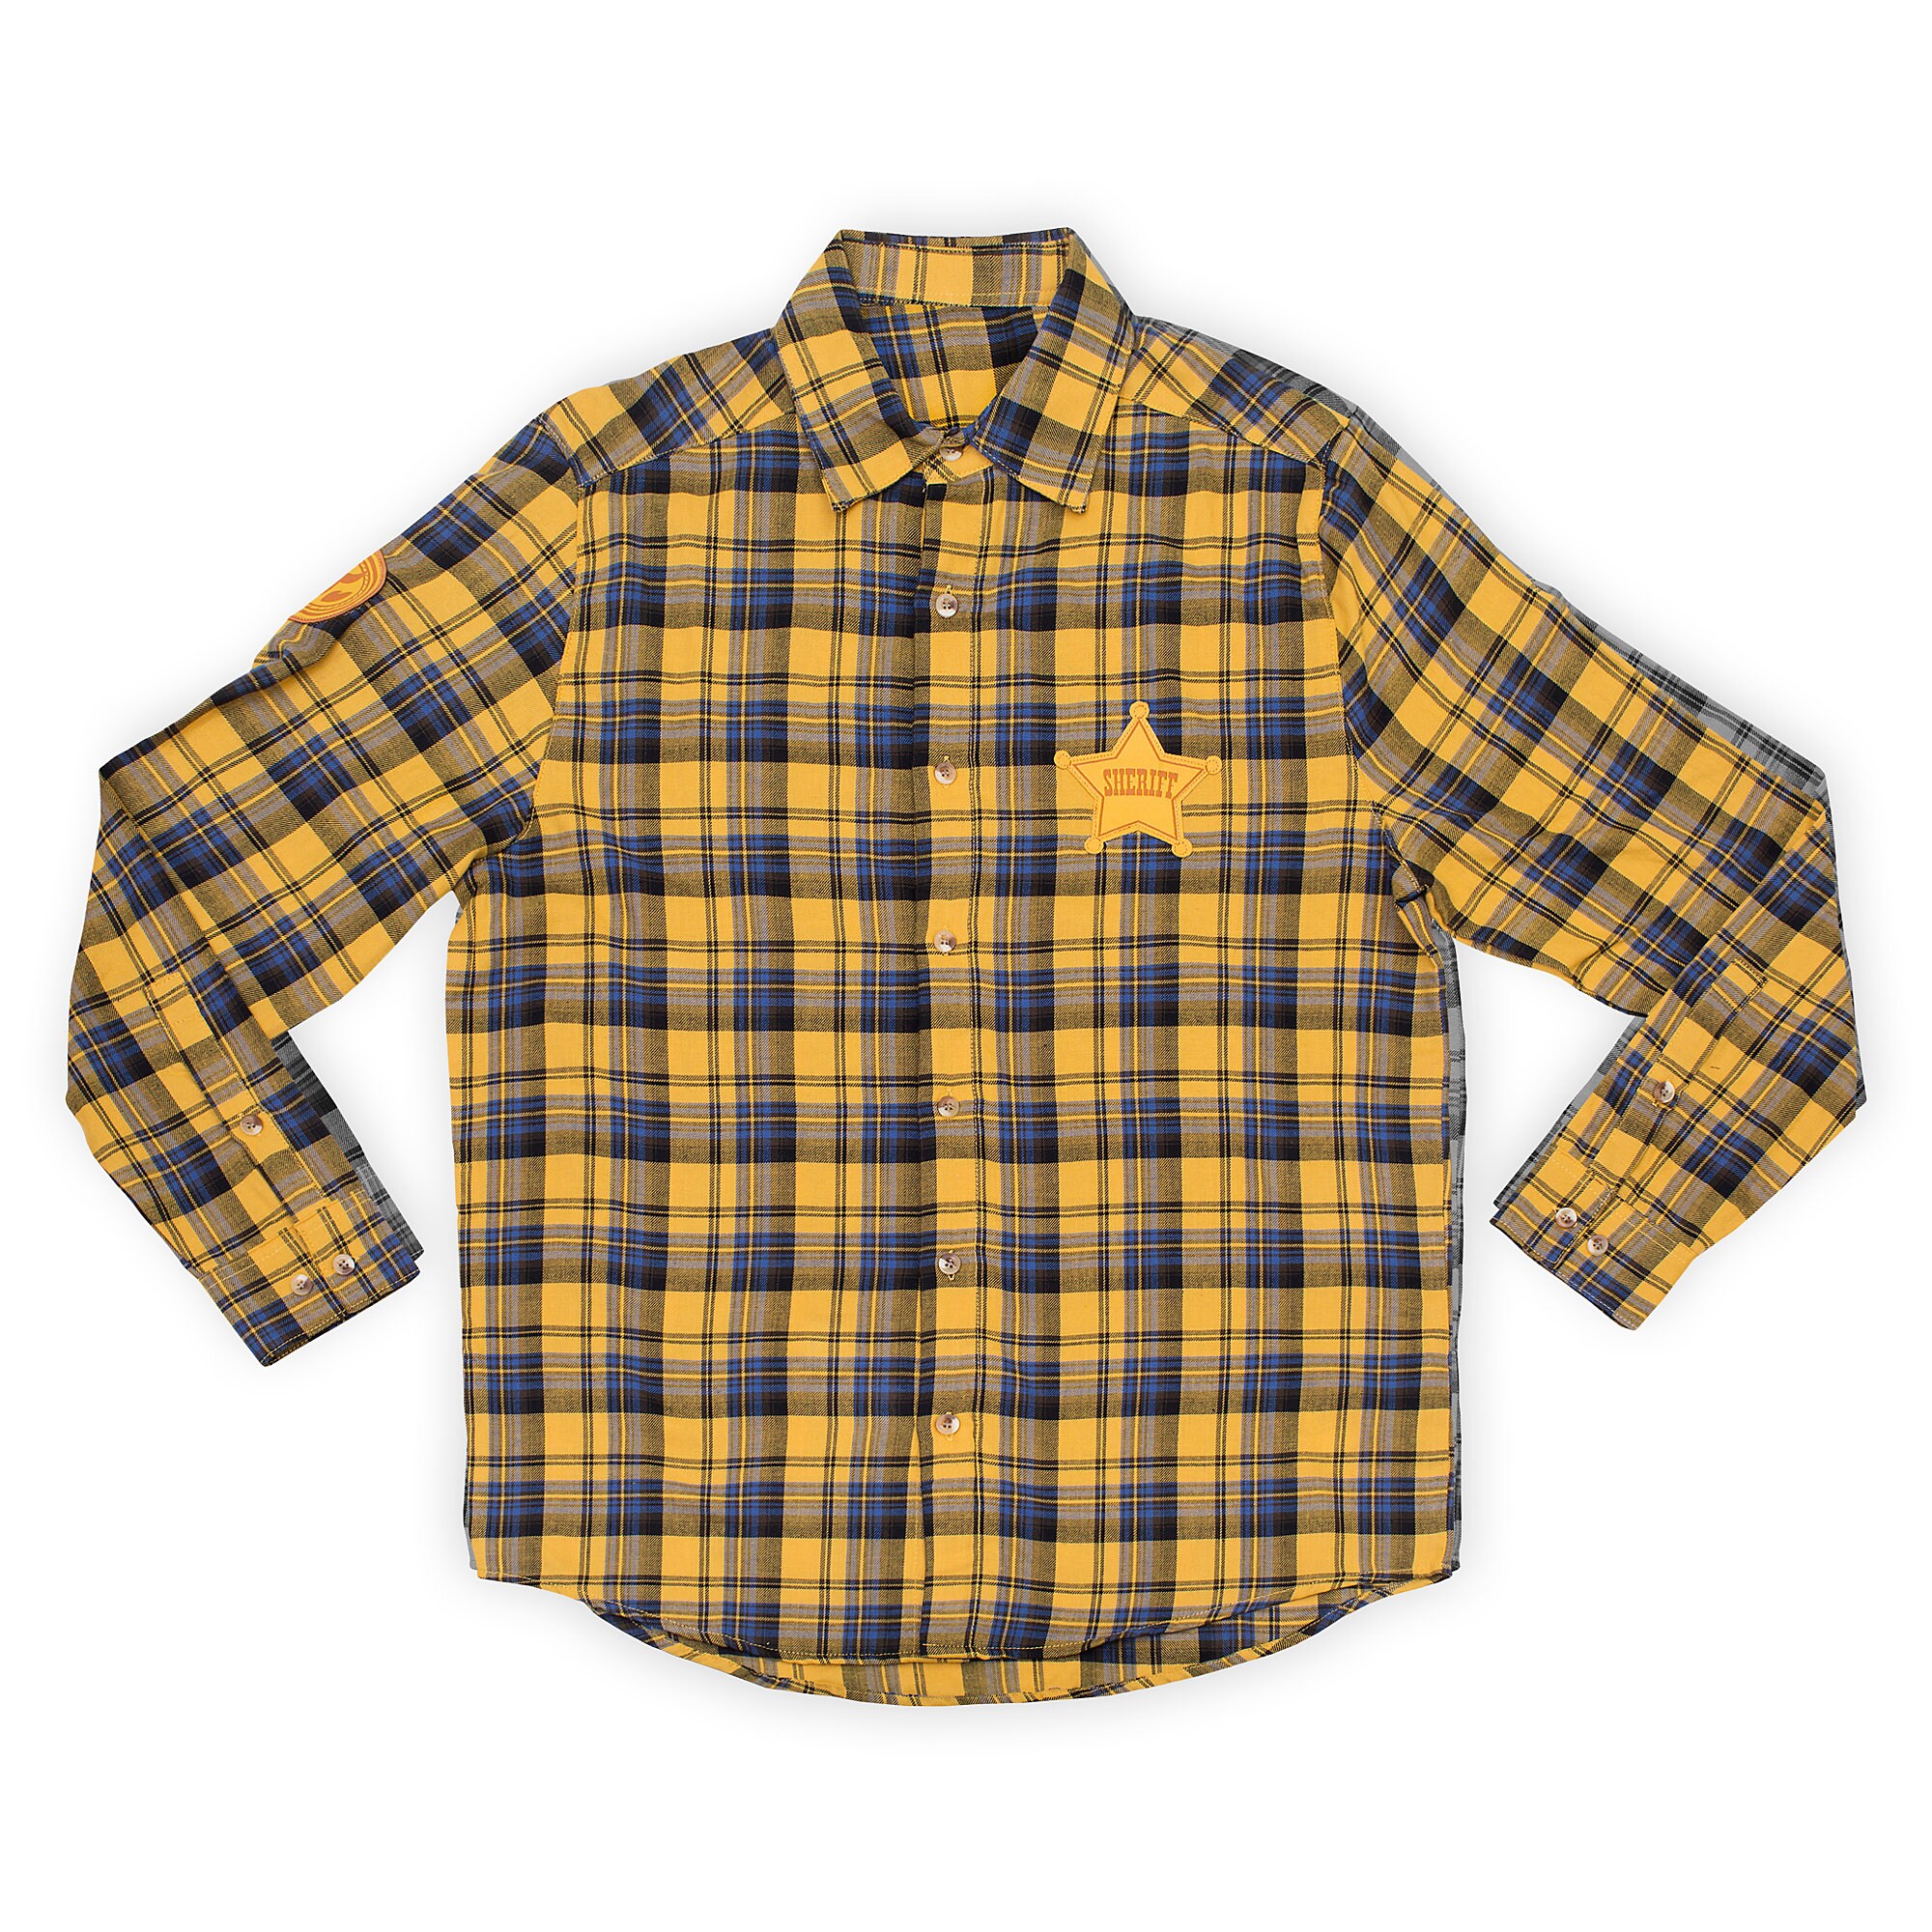 Woody Flannel Shirt for Adults by Cakeworthy - Toy Story 4